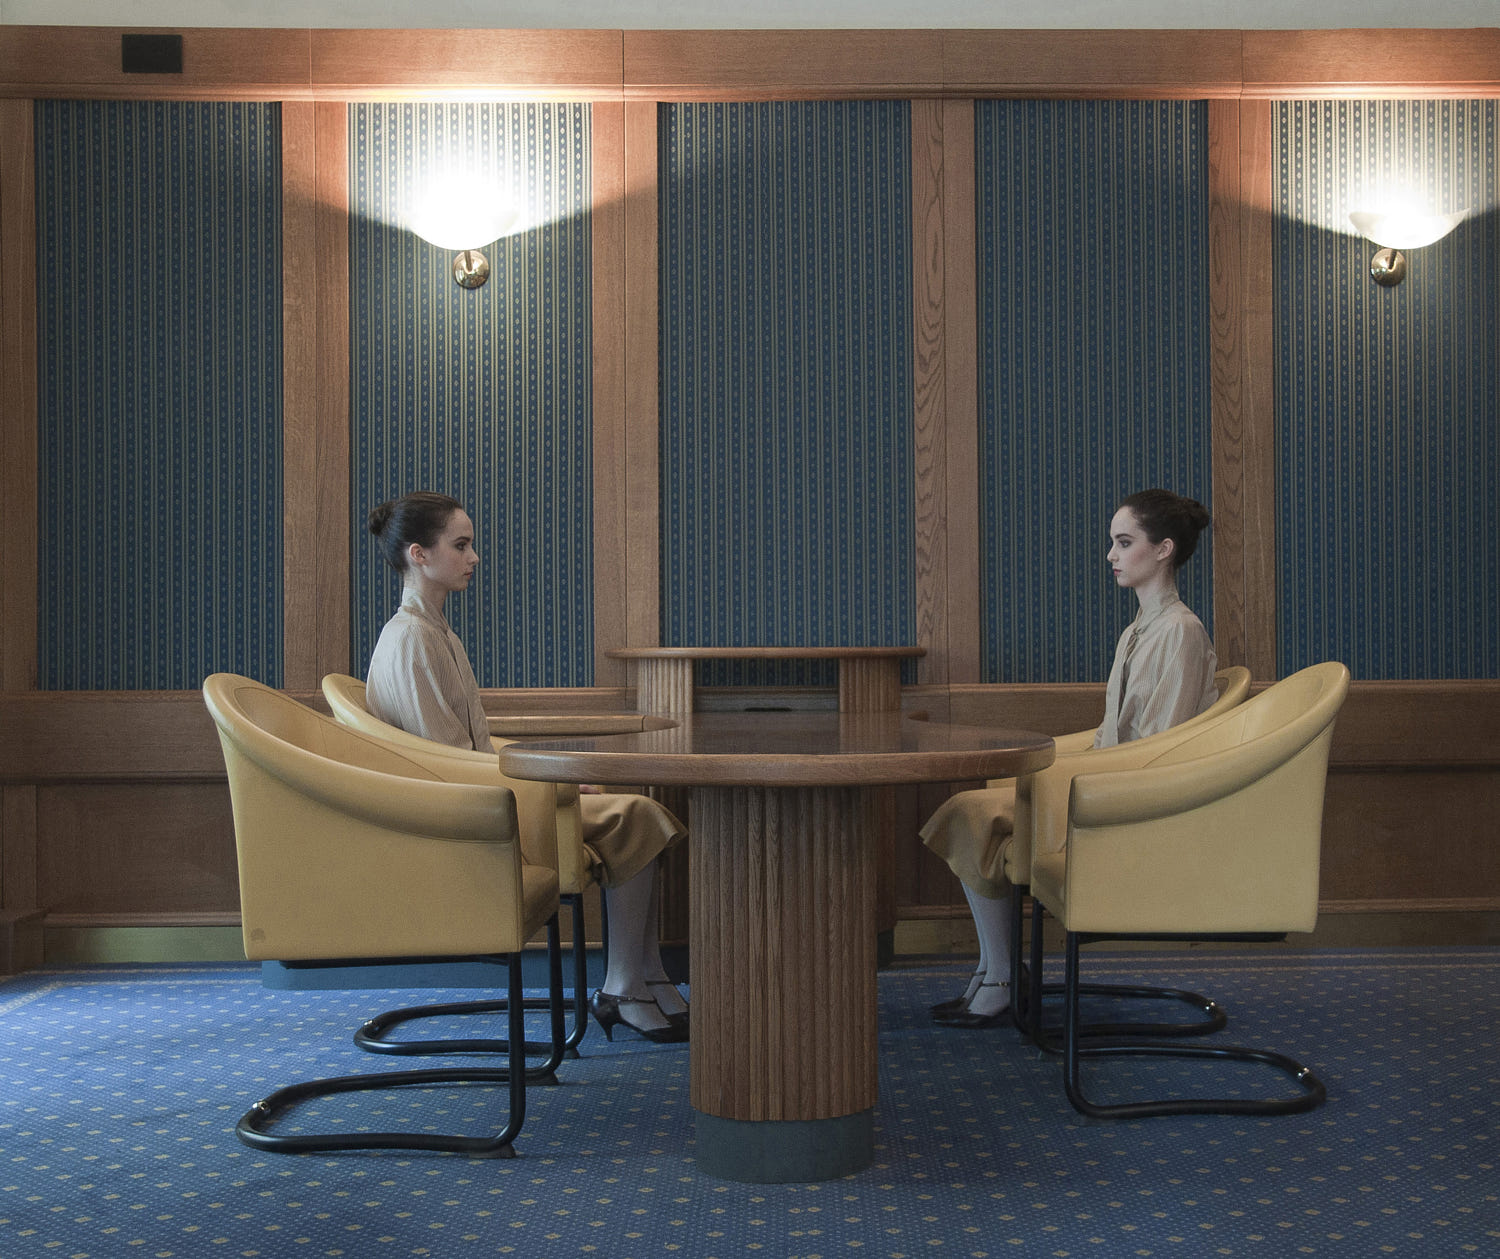 symmetry photography fashion dialogue by cristina coral